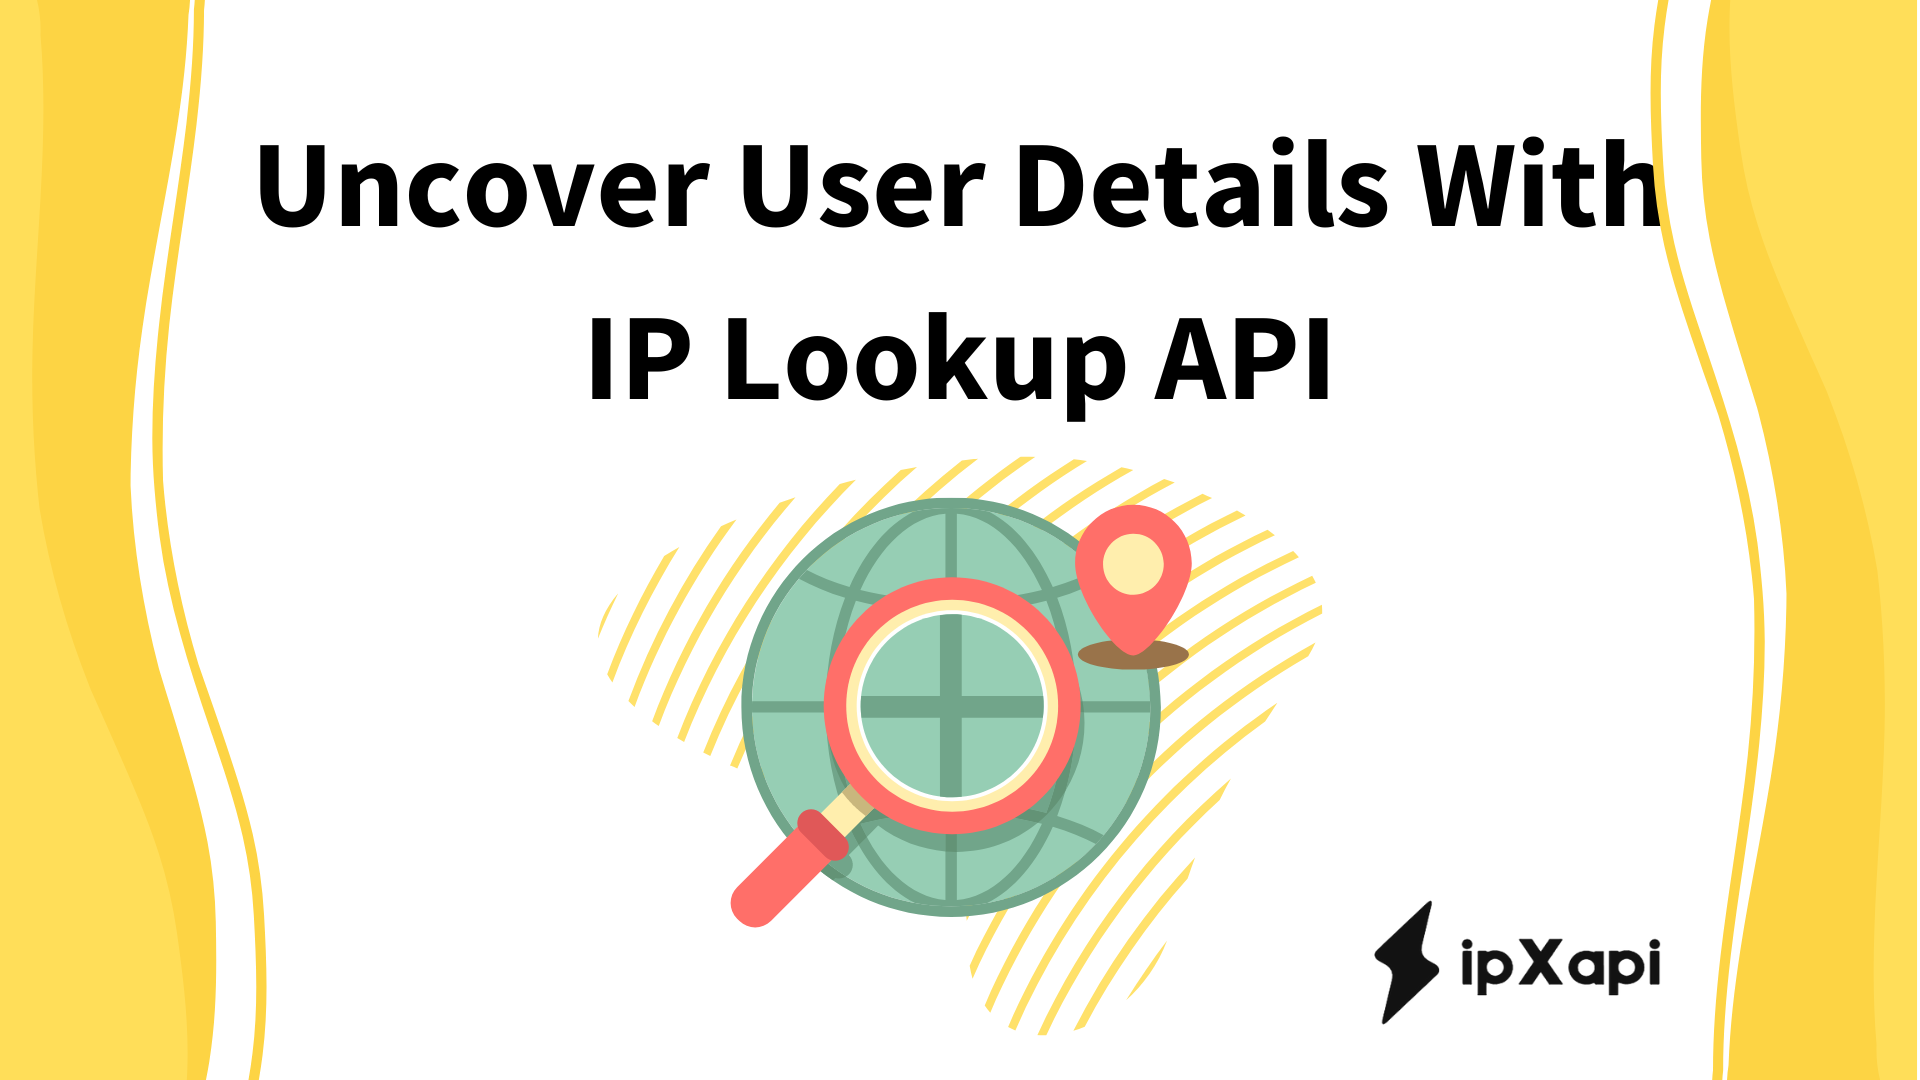 Uncover User Details With IP Lookup API